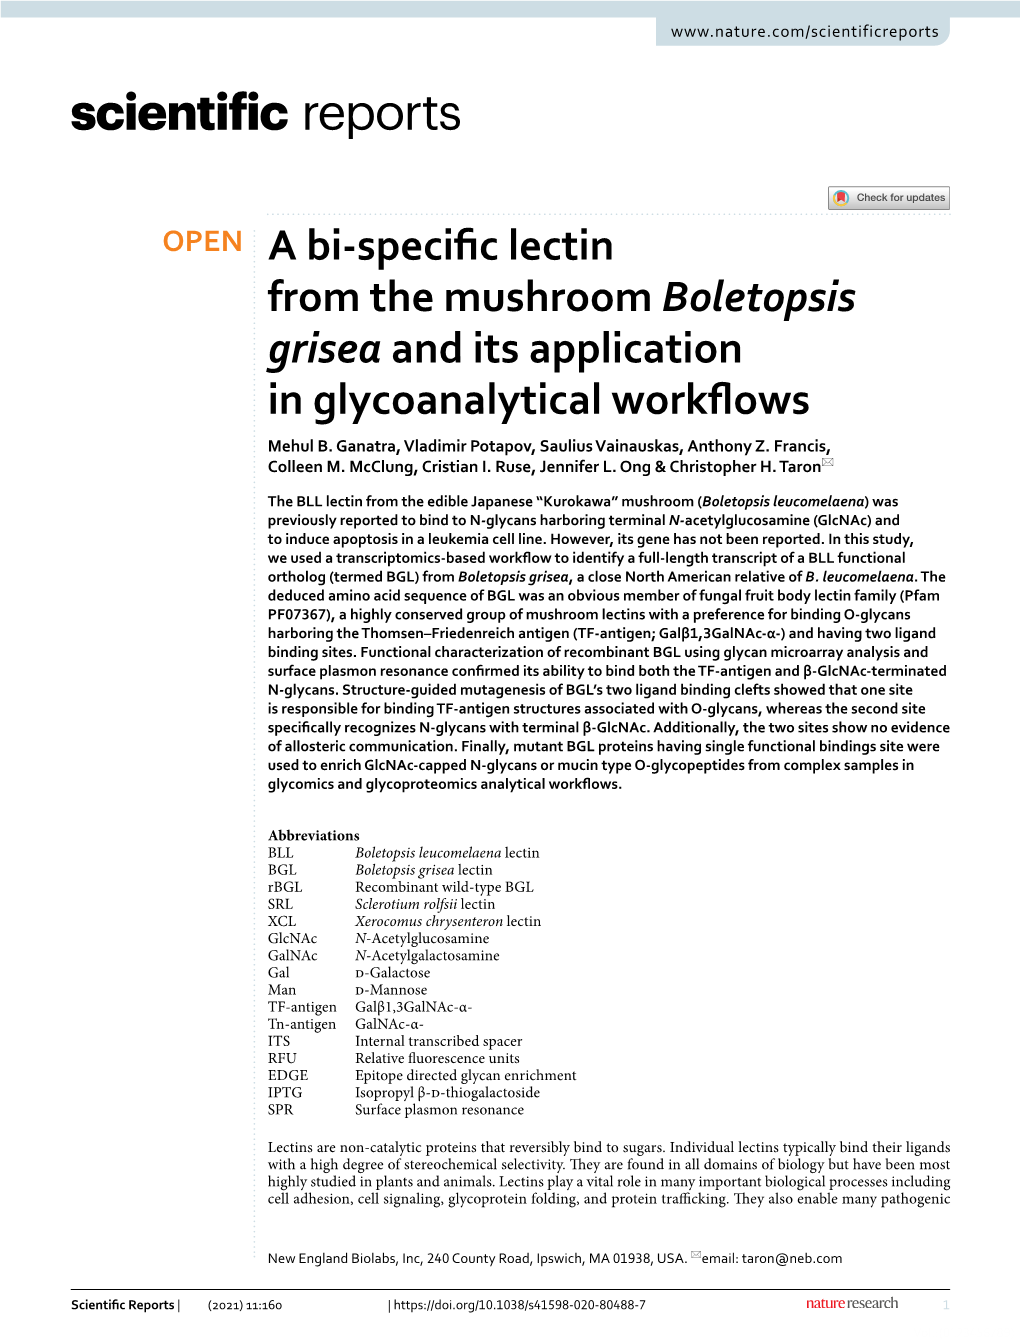 A Bi-Specific Lectin from the Mushroom Boletopsis Grisea and Its